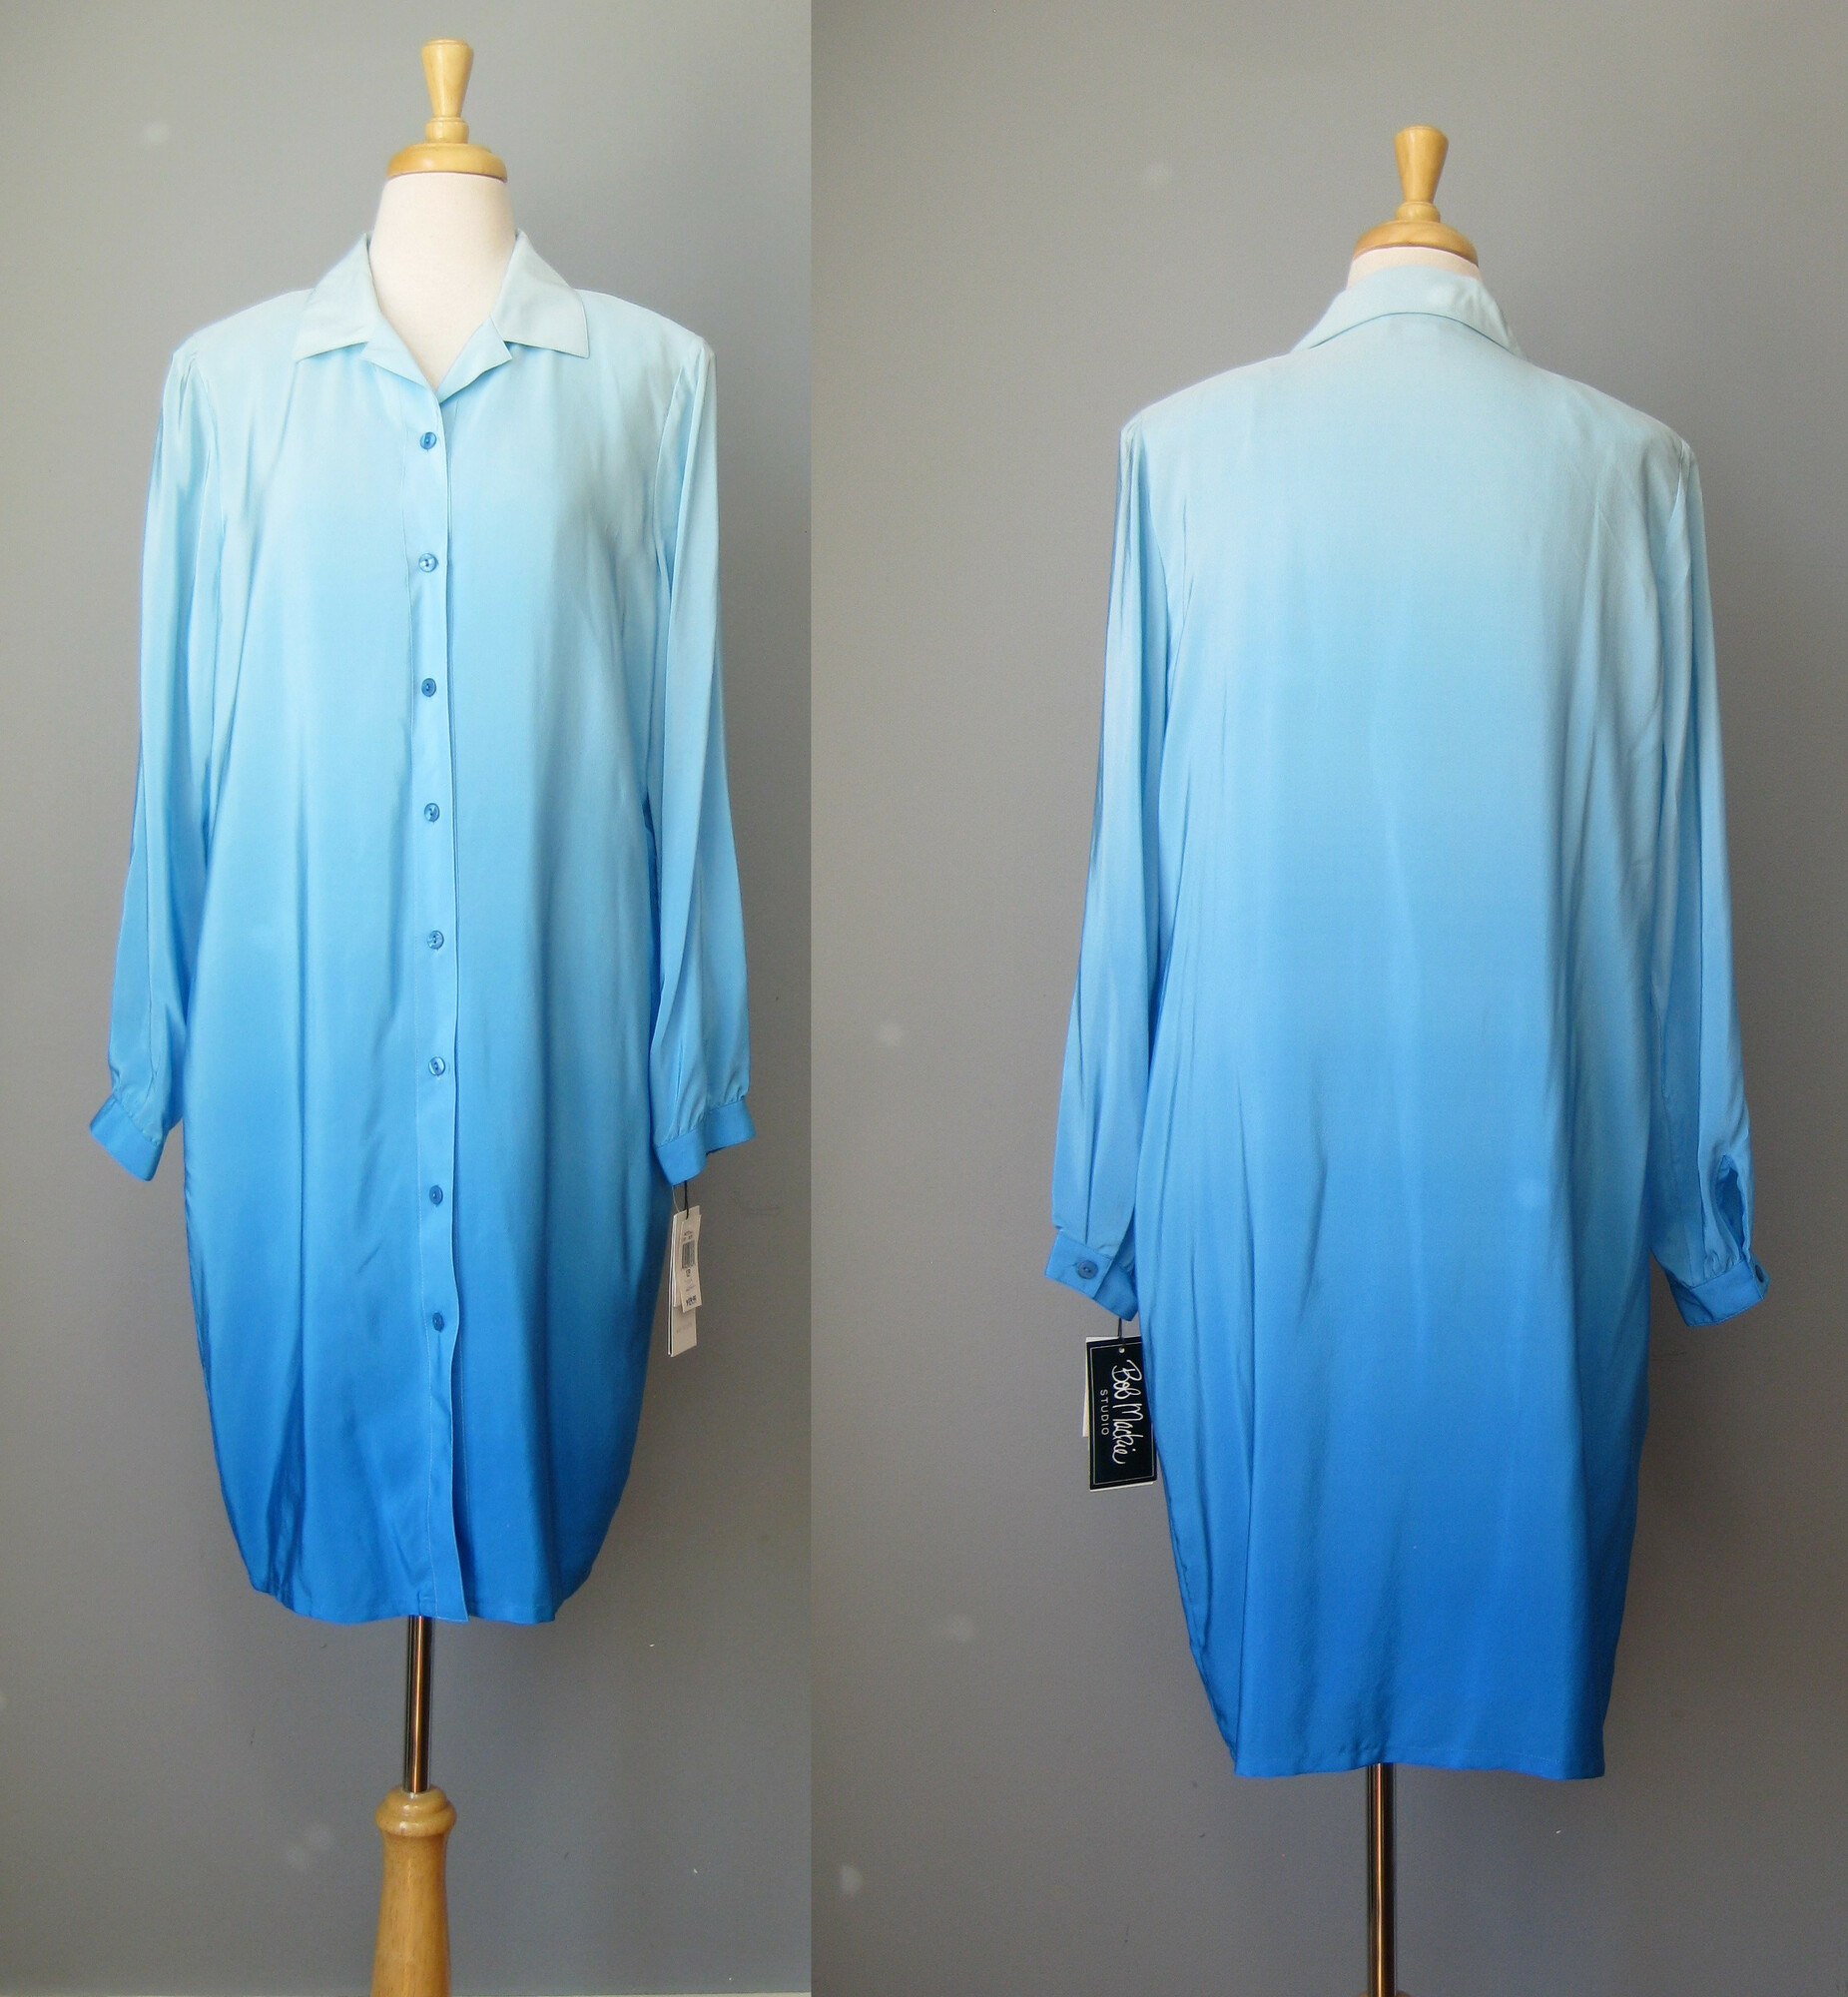 Deadstock piece from Bob Mackie
Heavenly Ombre Blue silk shirt dress or duster
long button sleeves
fully lined
soft shoulder pads set with snaps, removing these will not ruin the line of the garment, as it was designed to be worn either way.

Marked size 12 P
Flat measurements:
Shoulder to shoulder: 16
Armpit to Armpit: 22
Waist: 20.5
Hip: 22.5
underarm sleeve seam: 17.5
Length: 38

Excellent condition, no flaws!
thanks for looking!
#42883